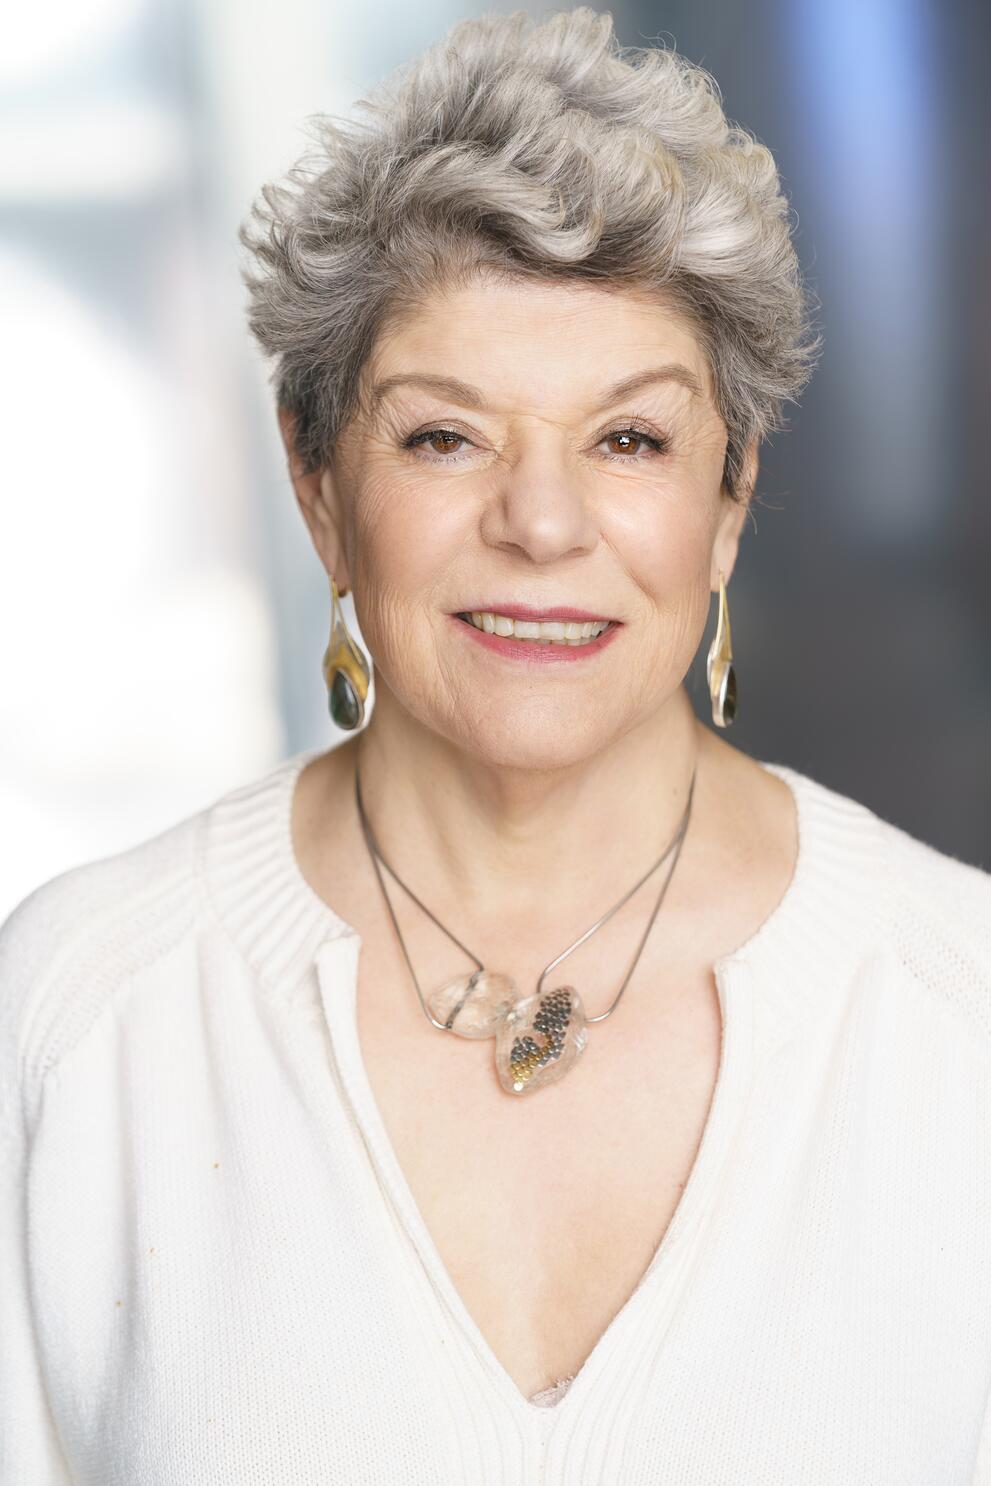 Image of Dr. Estela Bensimon with a smile wearing a cream v neck top.  Dr. Bensimon is wearing dangling earrings and a necklace with a large metal butterfly.  Dr. Estela Bensimon's hair is cut short and wavy. 